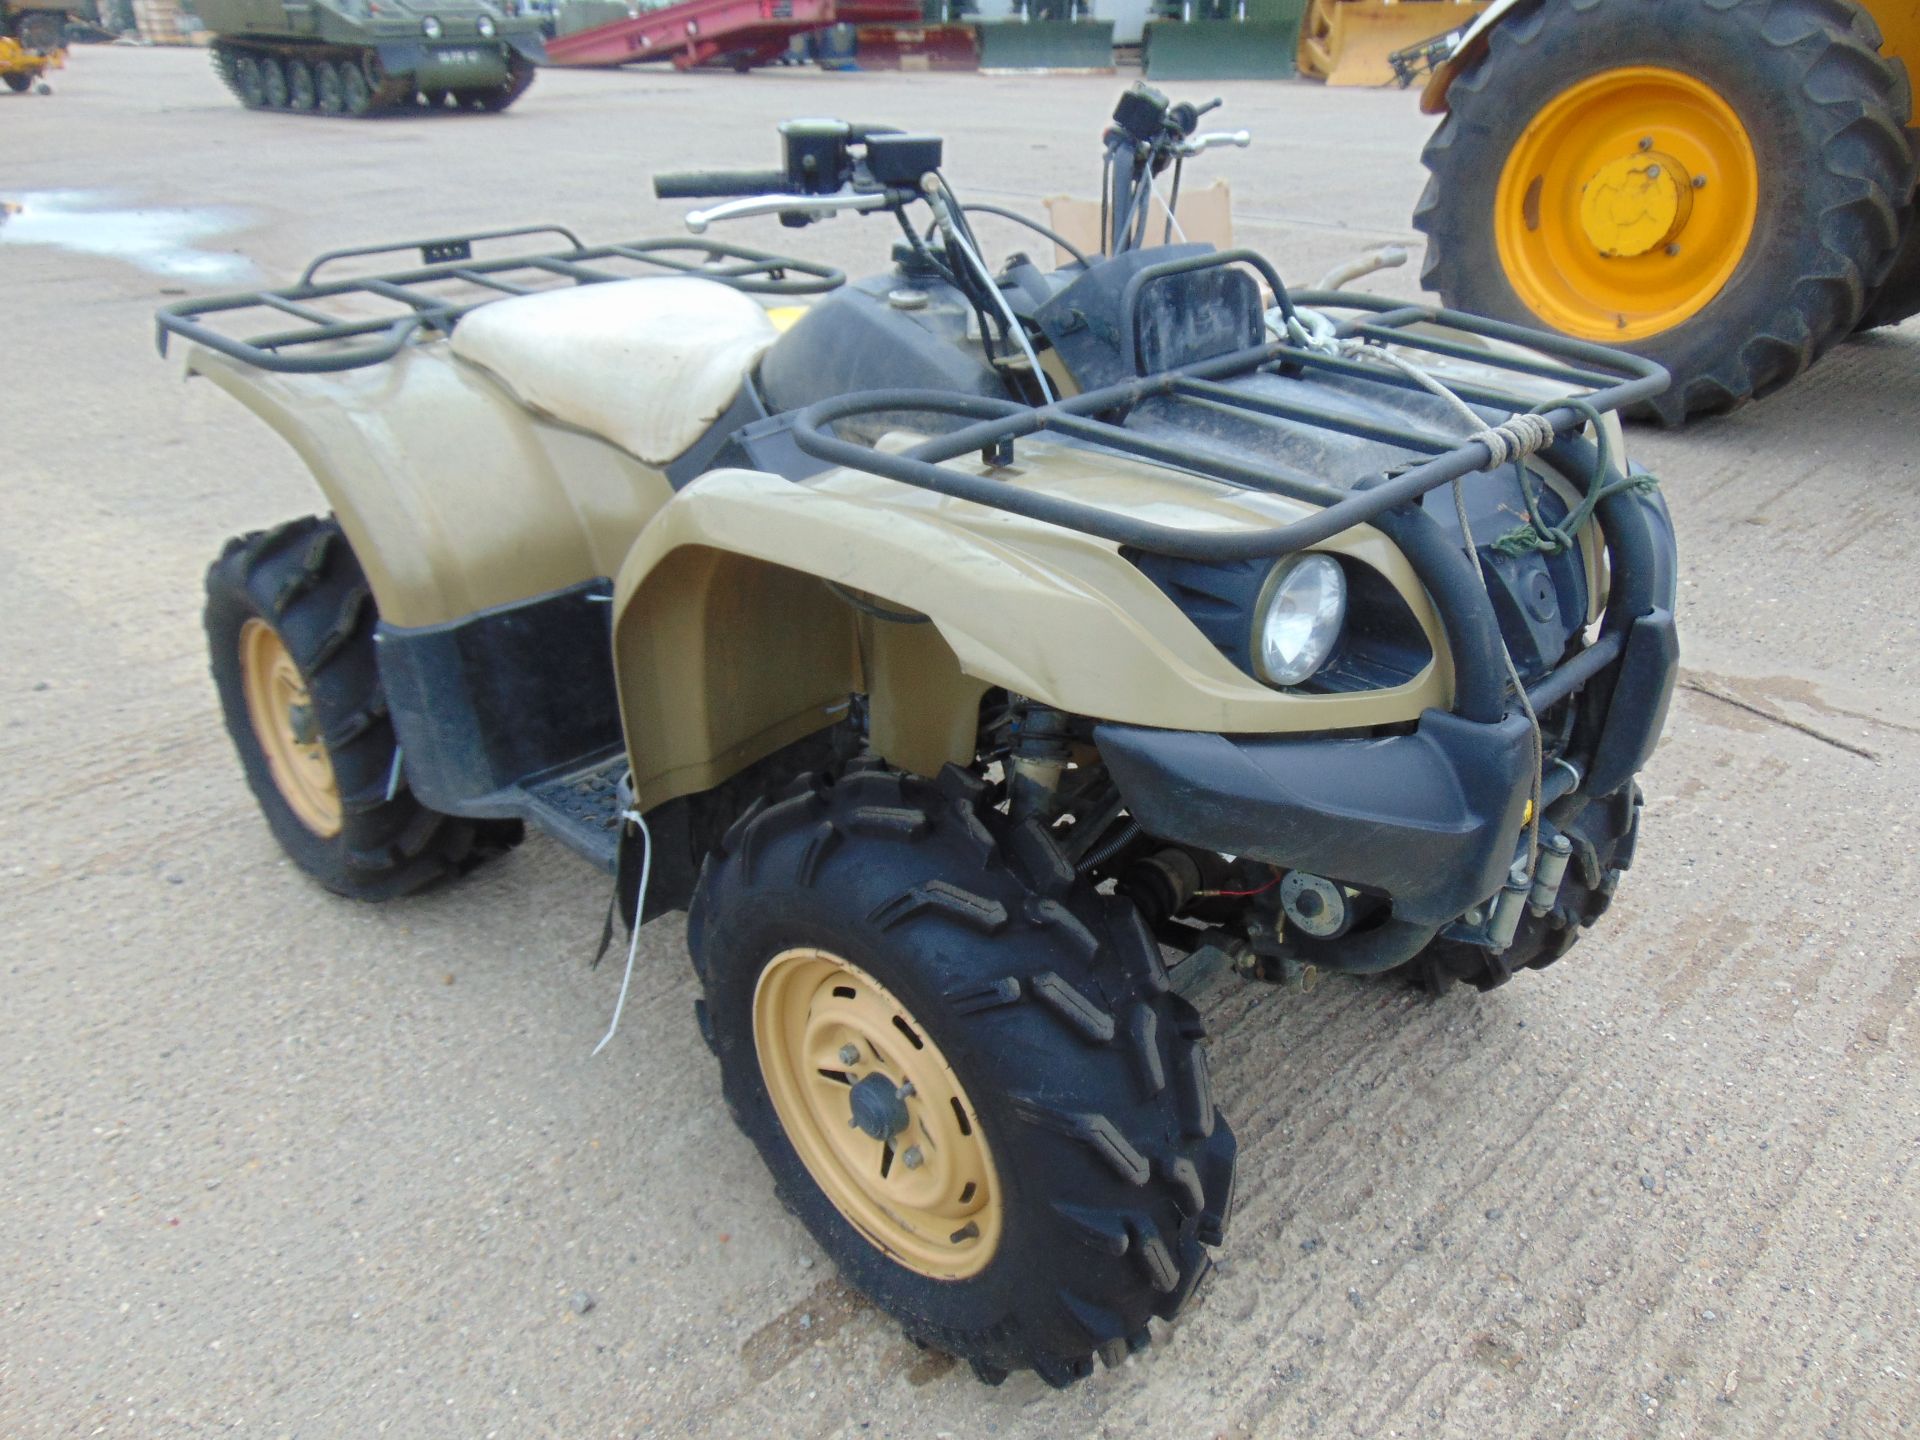 Military Specification Yamaha Grizzly 450 4 x 4 ATV Quad Bike - Image 2 of 16